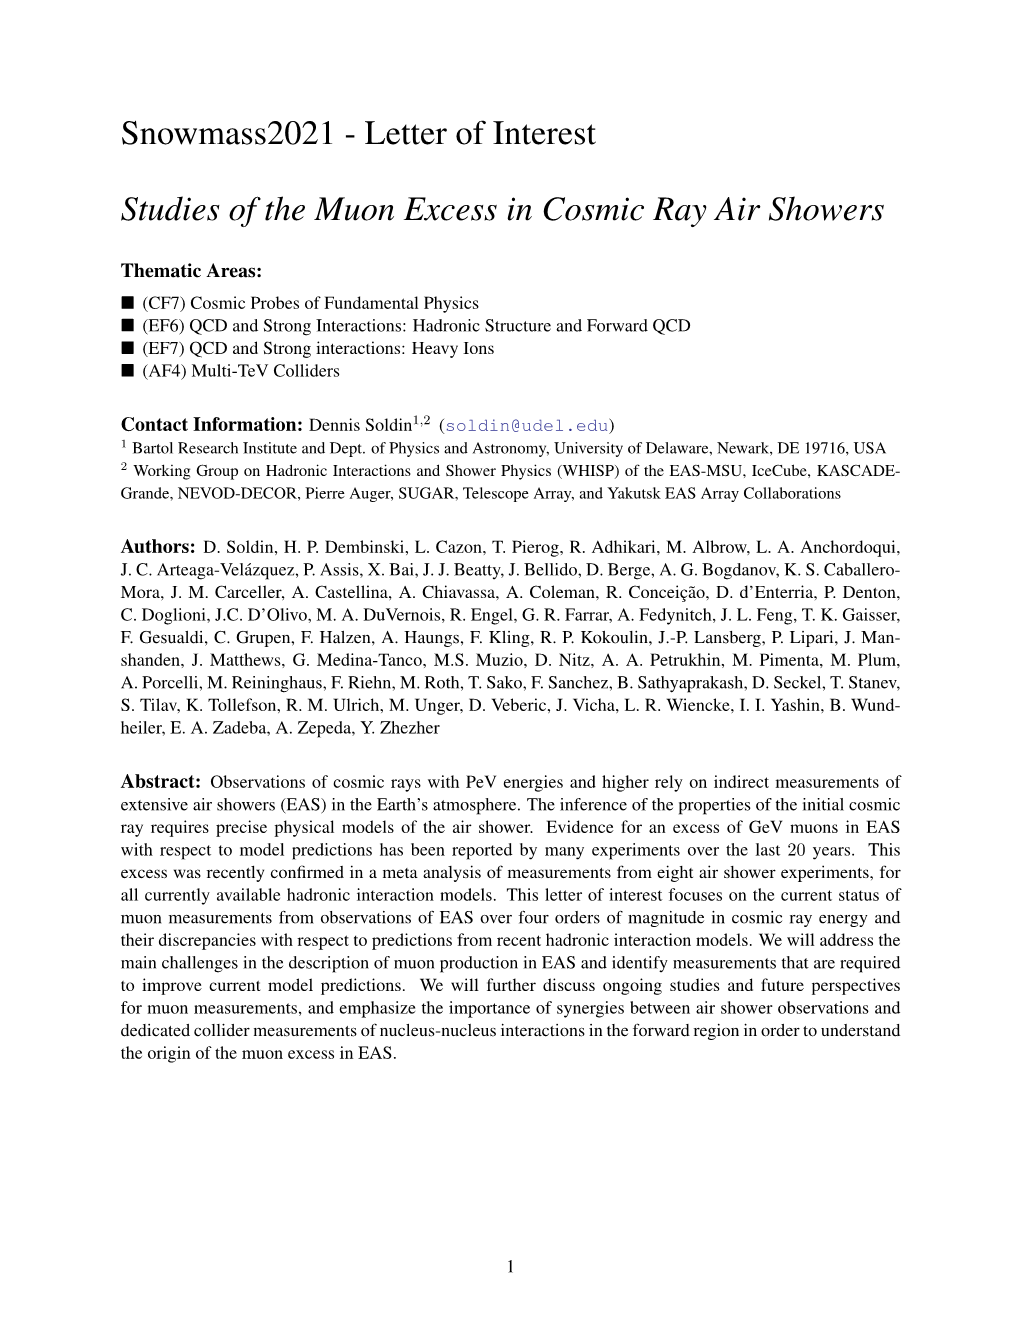 Letter of Interest Studies of the Muon Excess in Cosmic Ray Air Showers